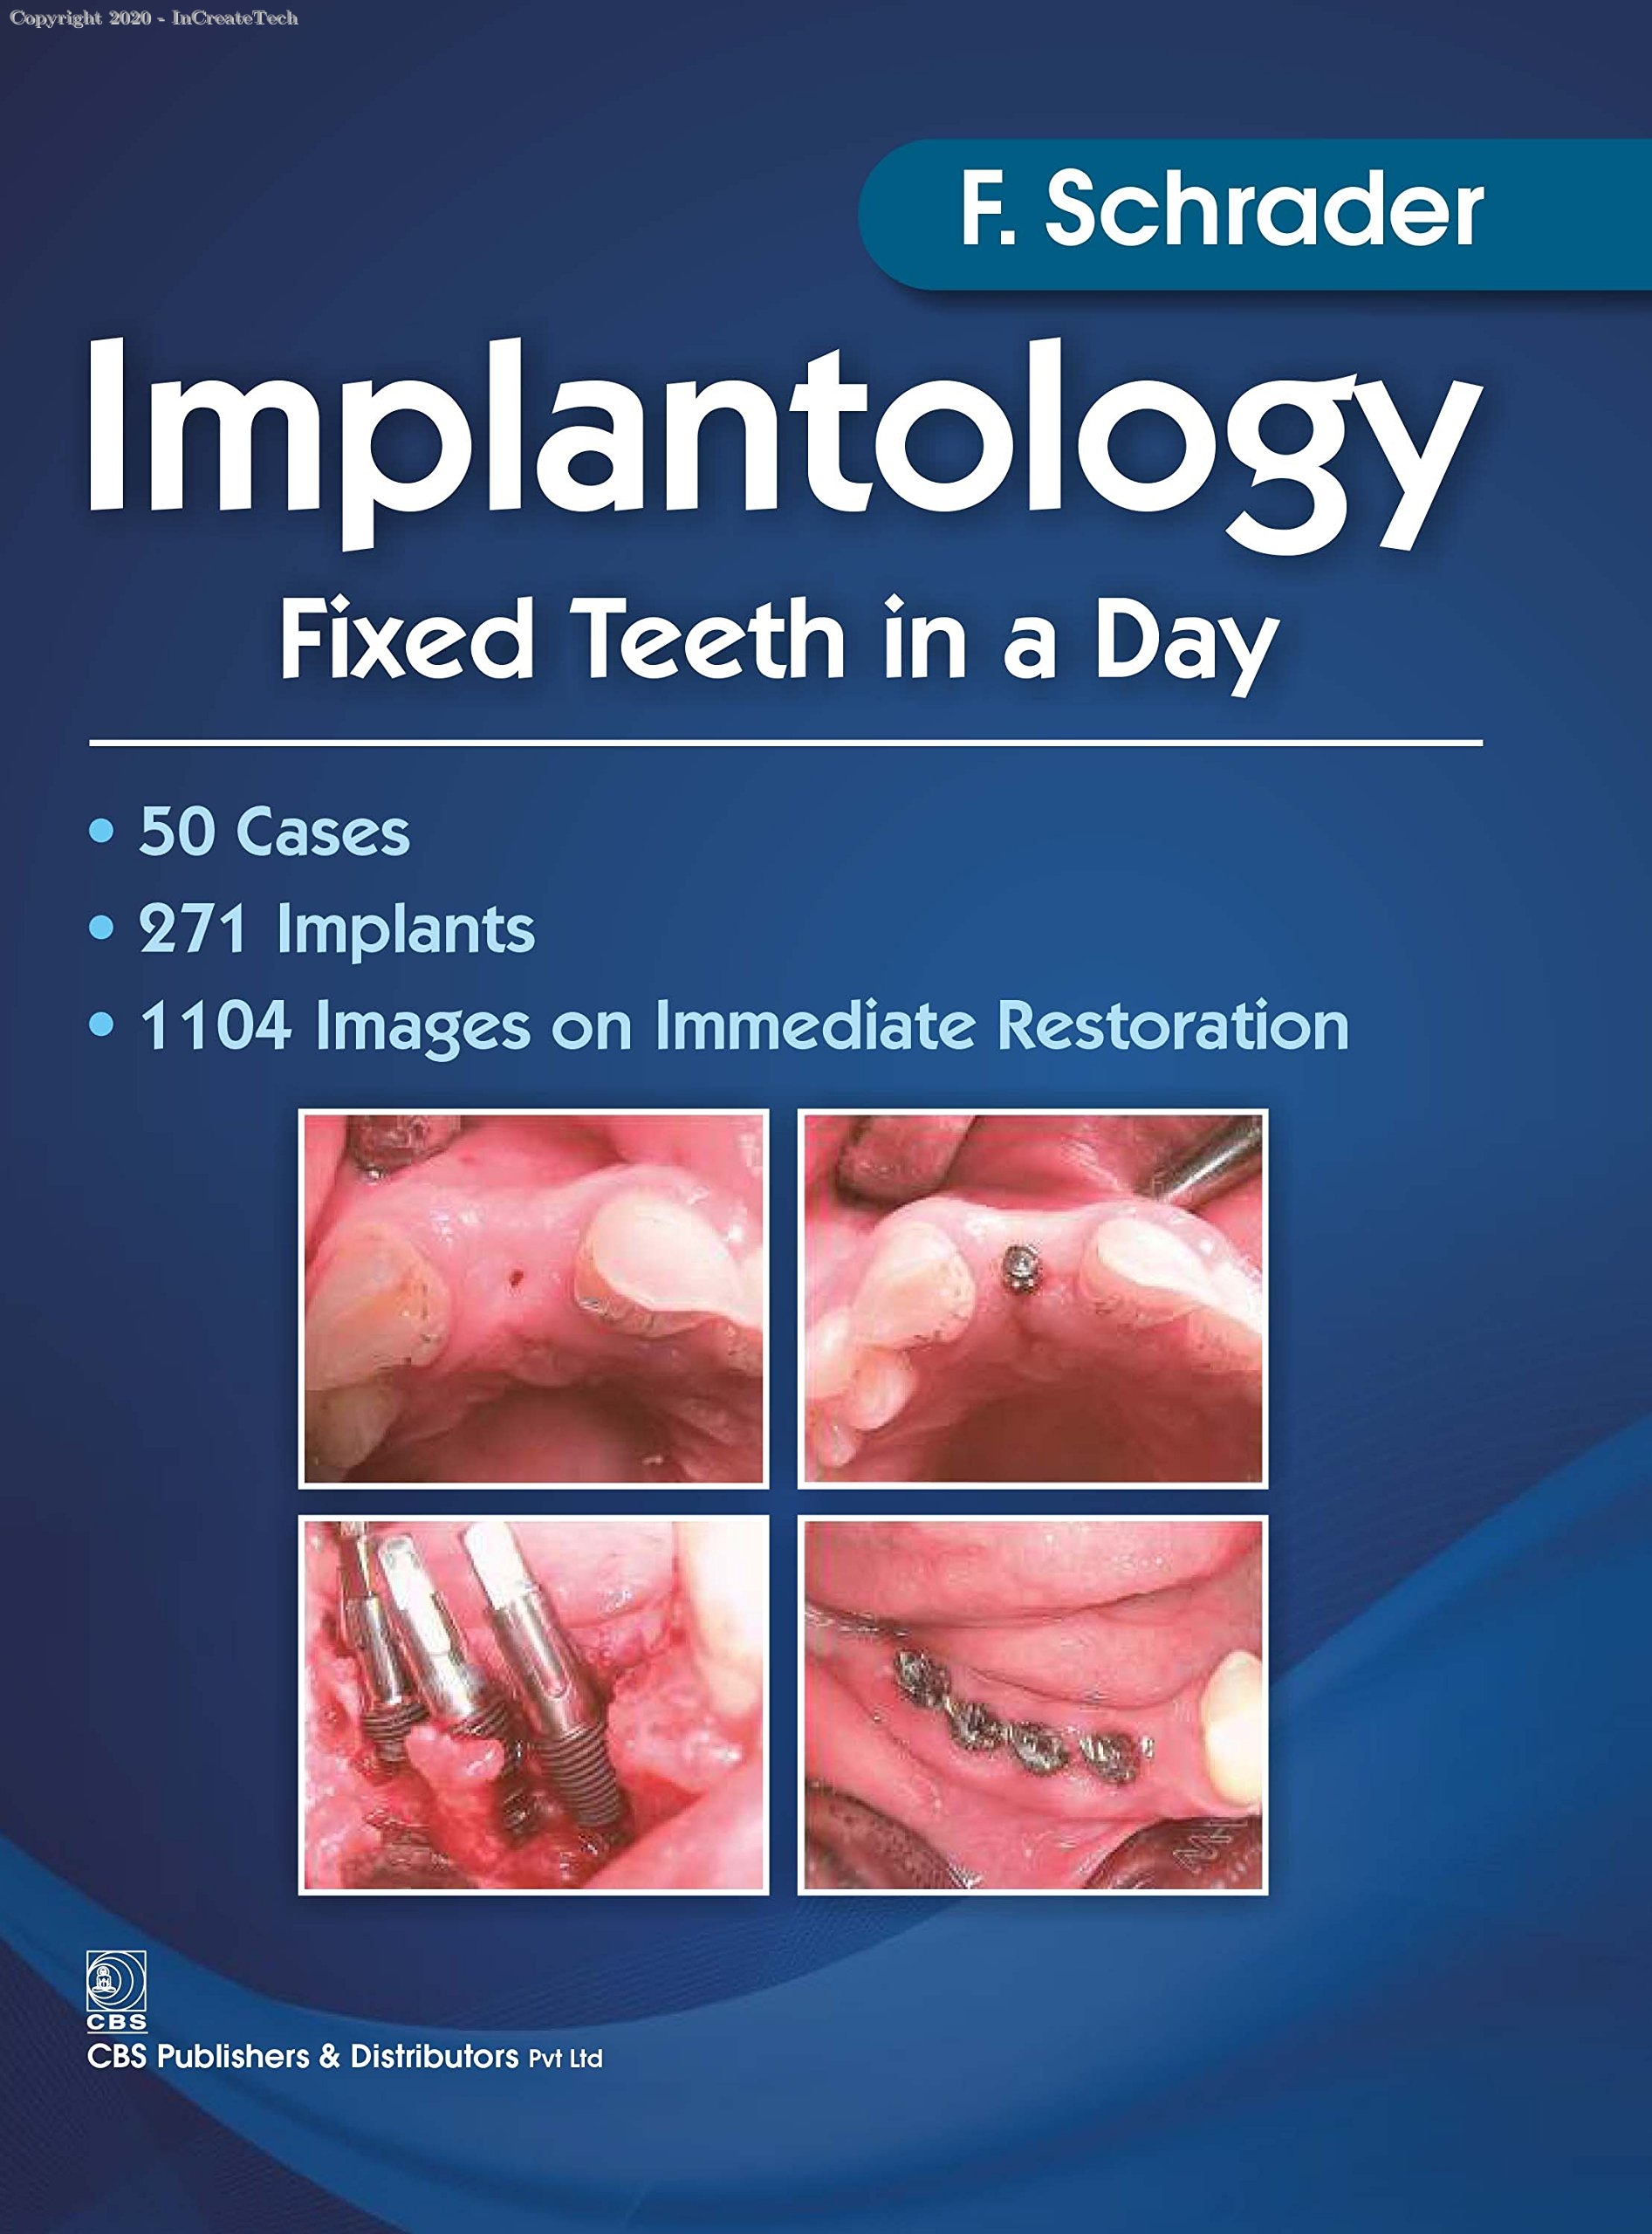 IMPLANTOLOGY FIXED TEETH IN A DAY